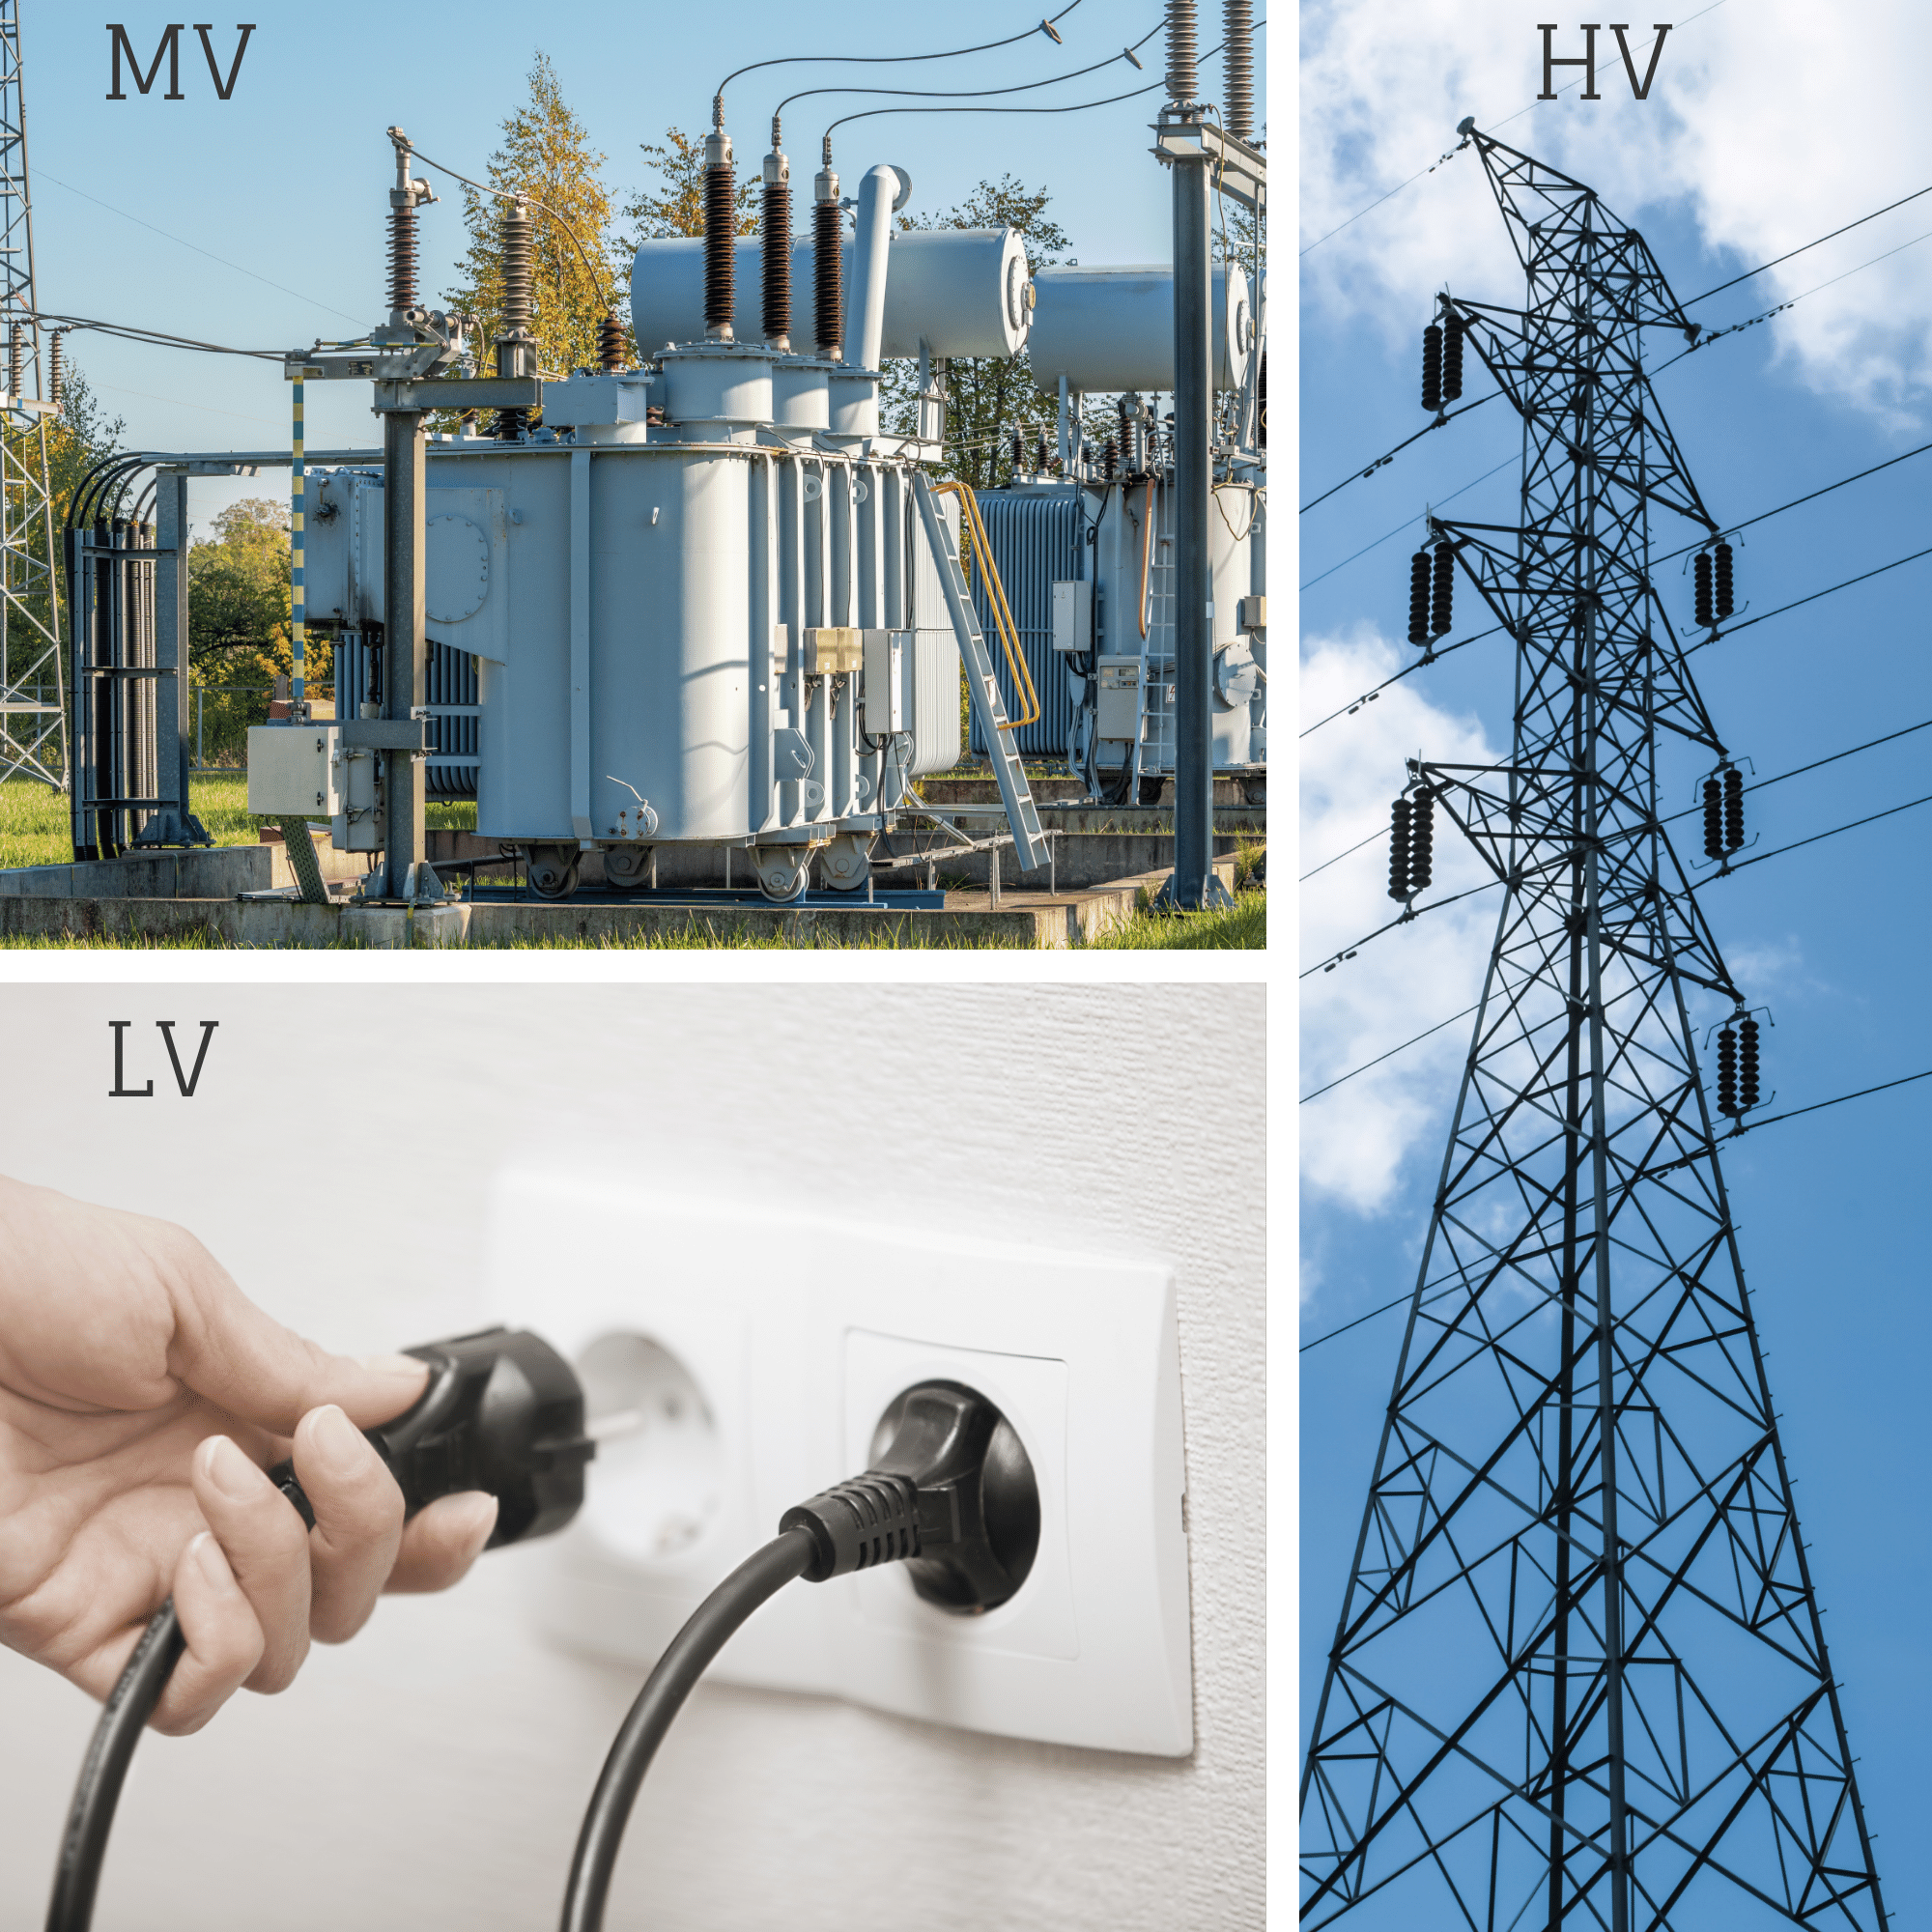 Classification of Voltage Levels - Extra-high, High, Medium, Low